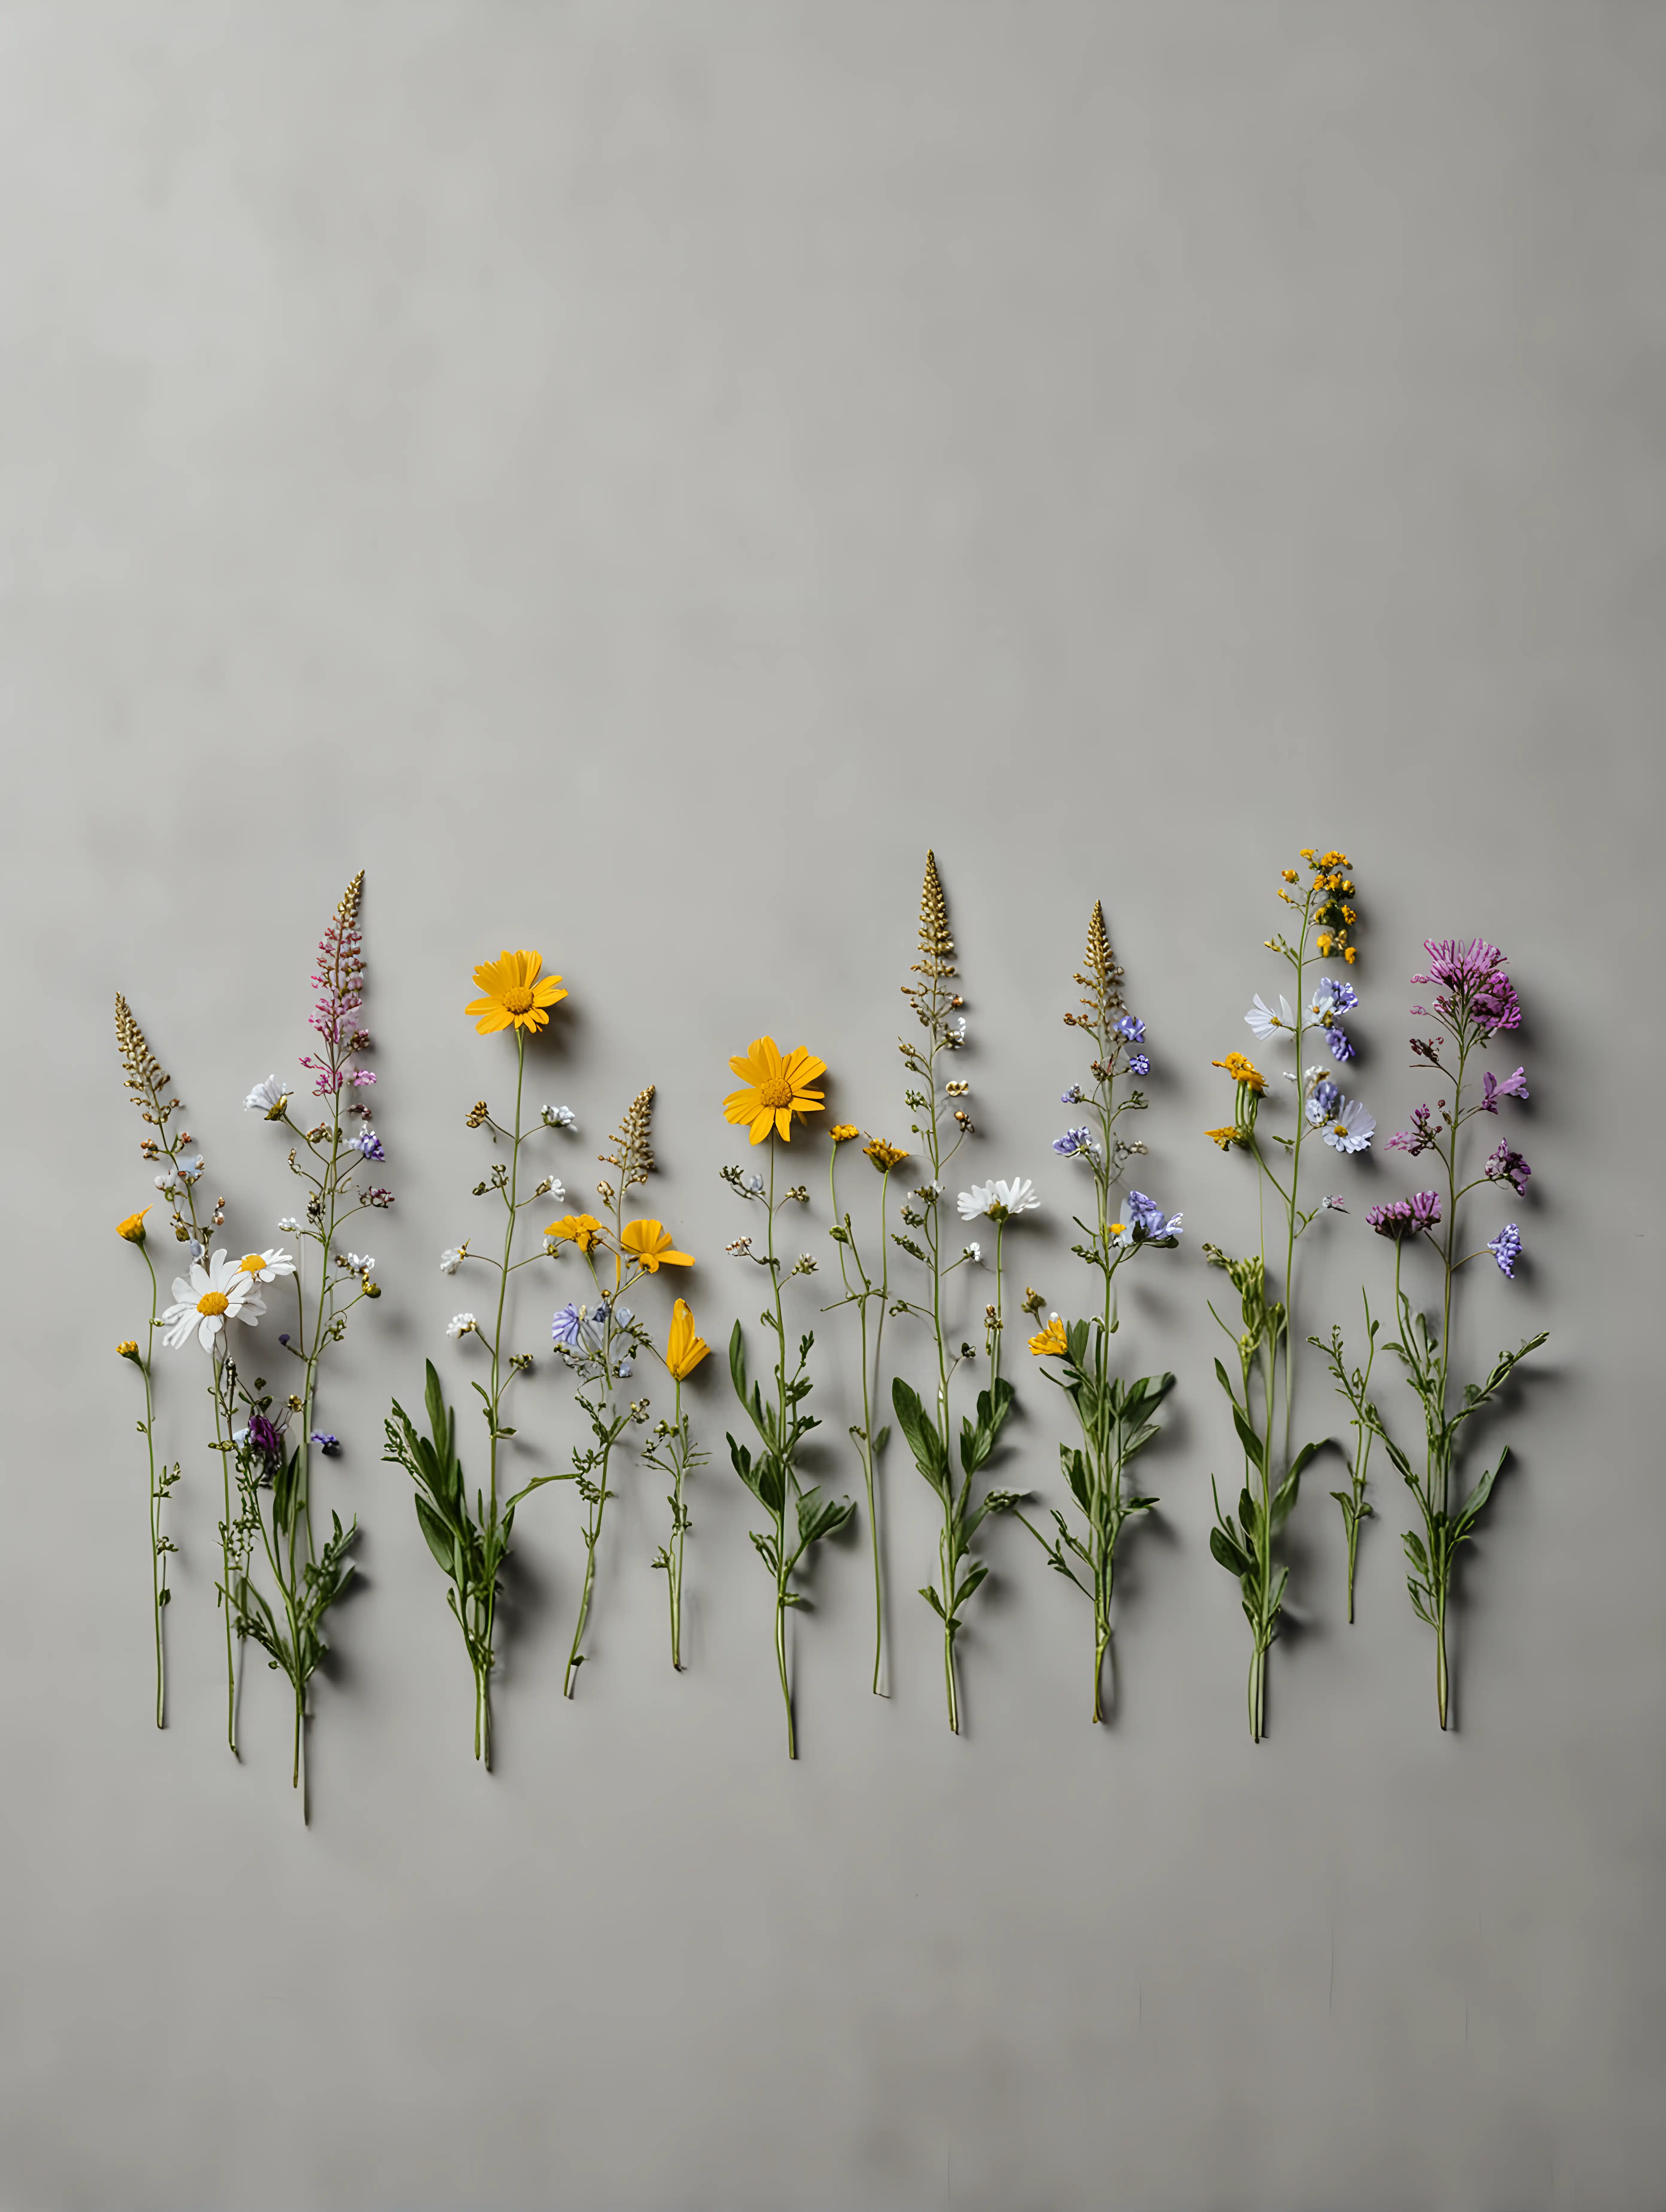 Colorful Wildflowers in Front of Neutral Gray Background